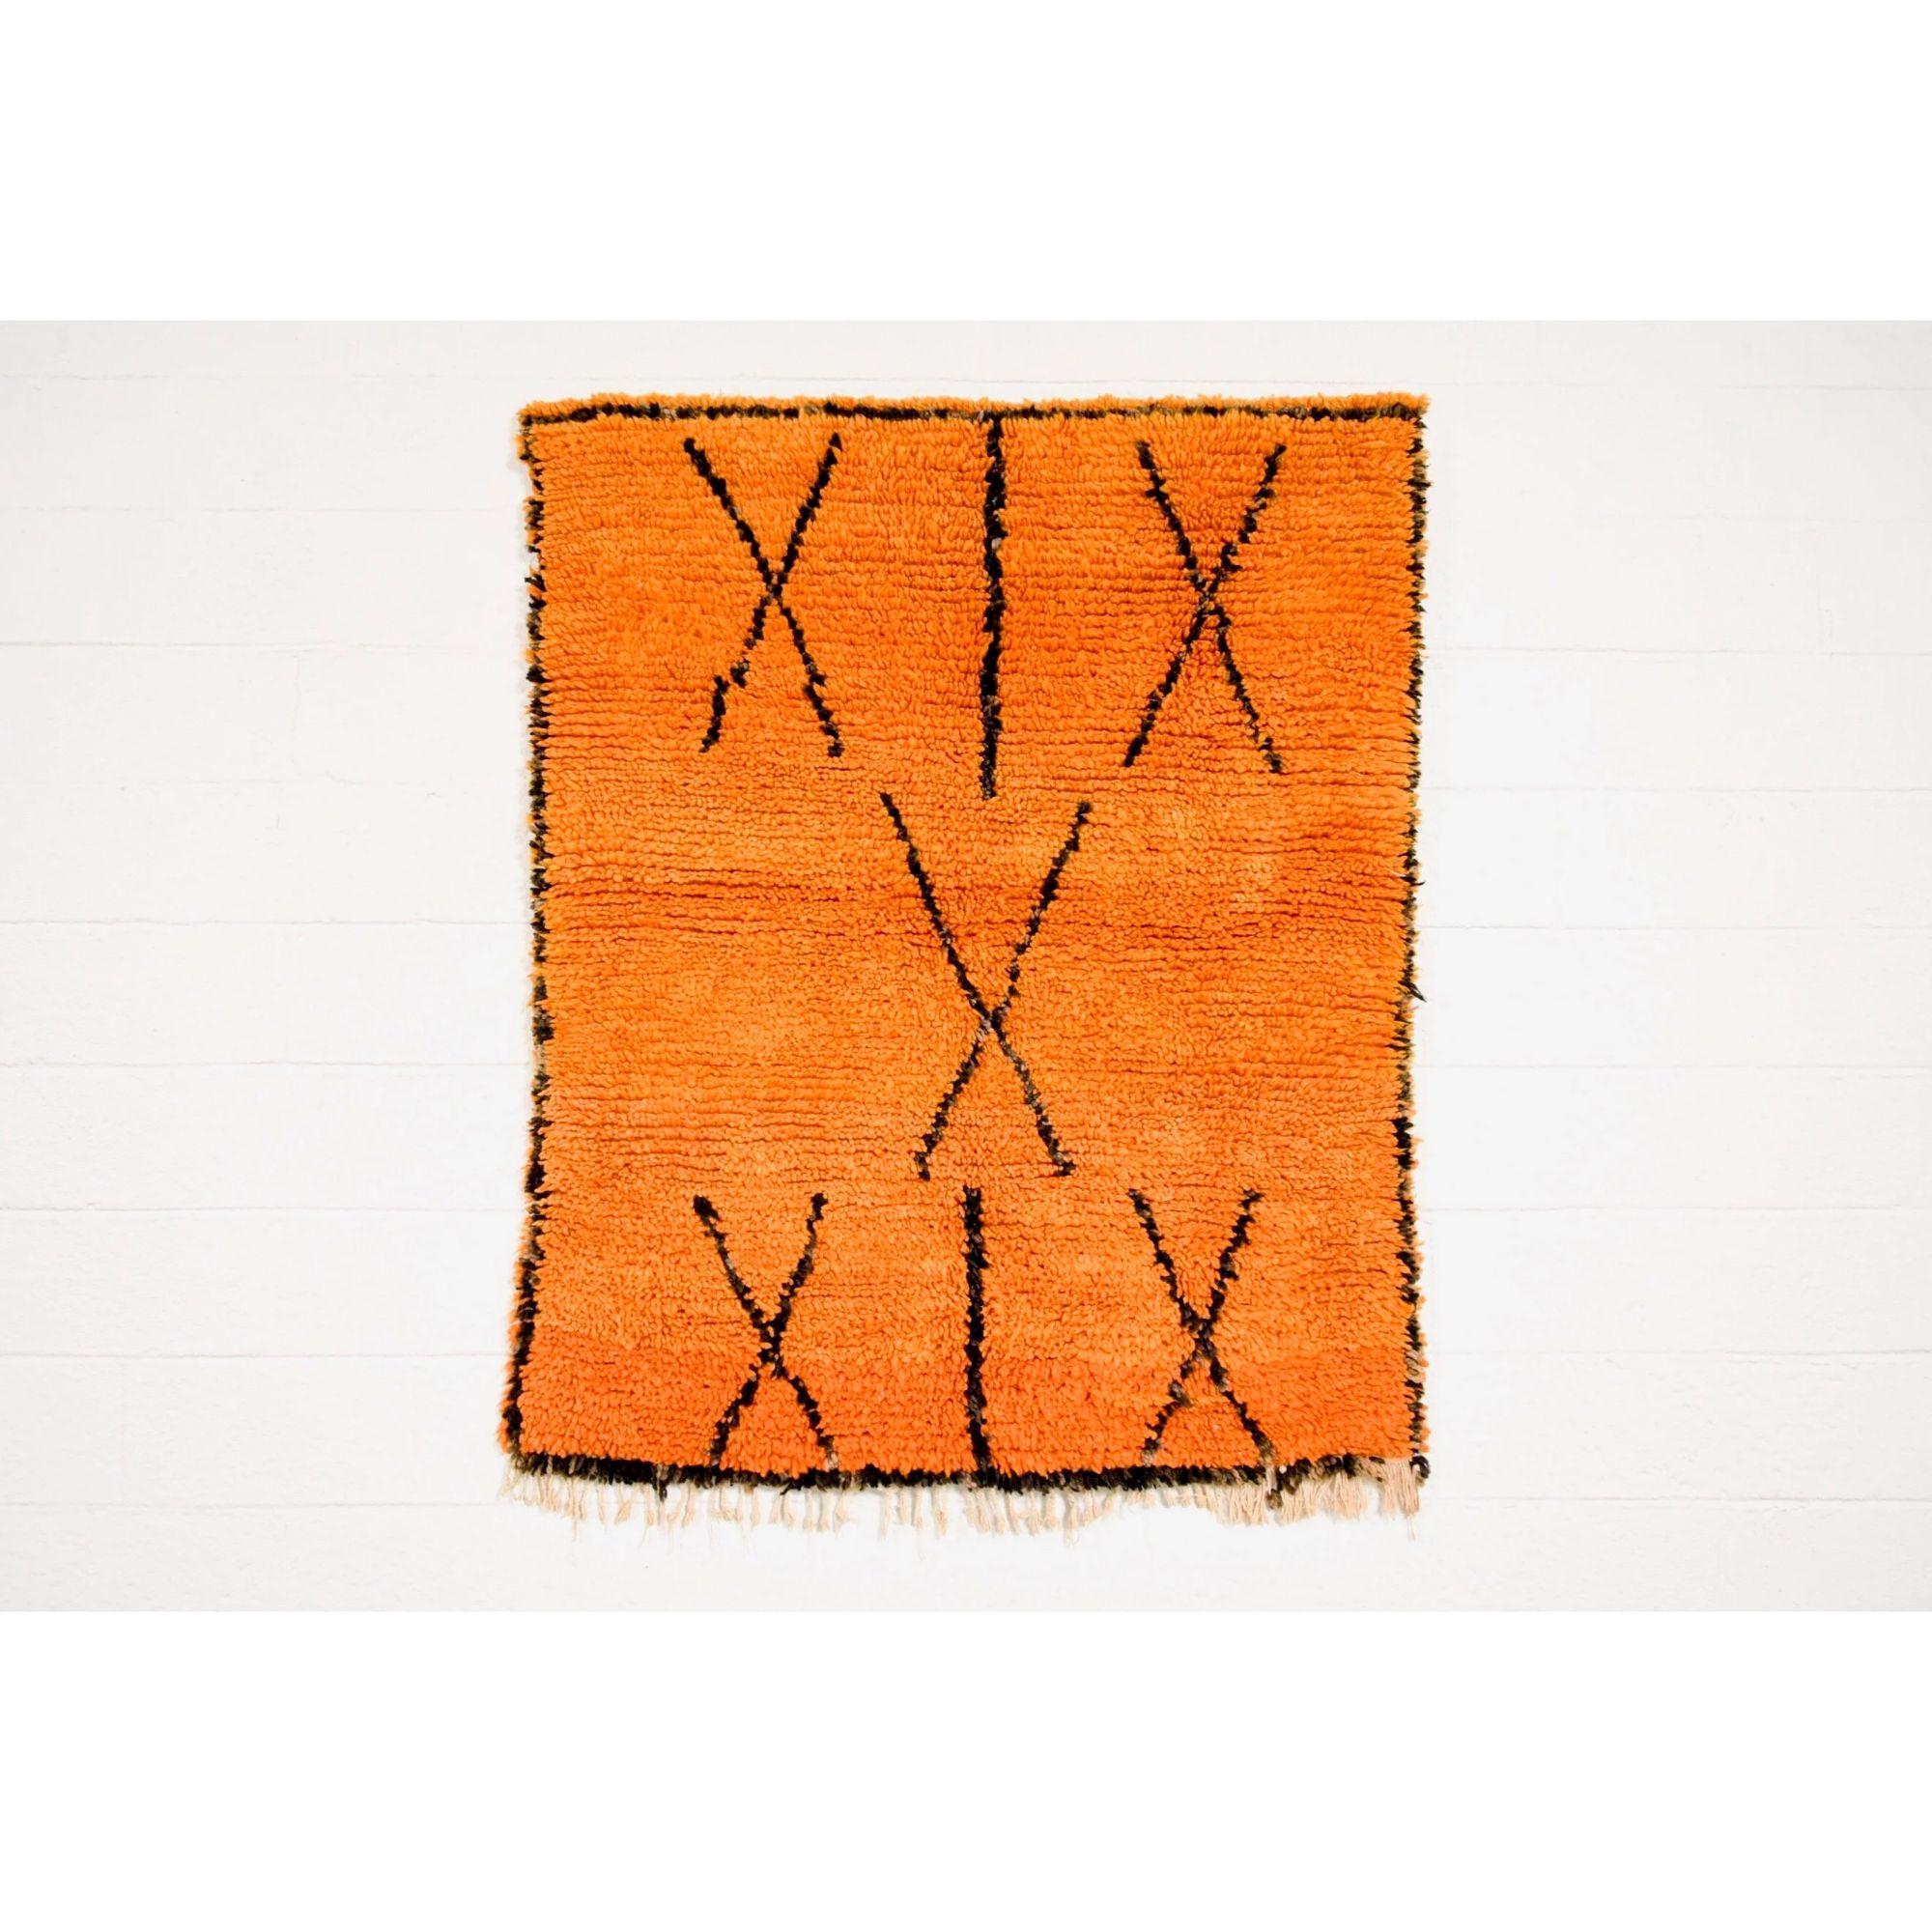 This vintage handwoven Moroccan Azilal tribal floor rug features a design of asymmetrical black crisscross shapes and border edge set against a stunning tangerine orange color field. The thick wool pile is shaggy and full and the area rug is